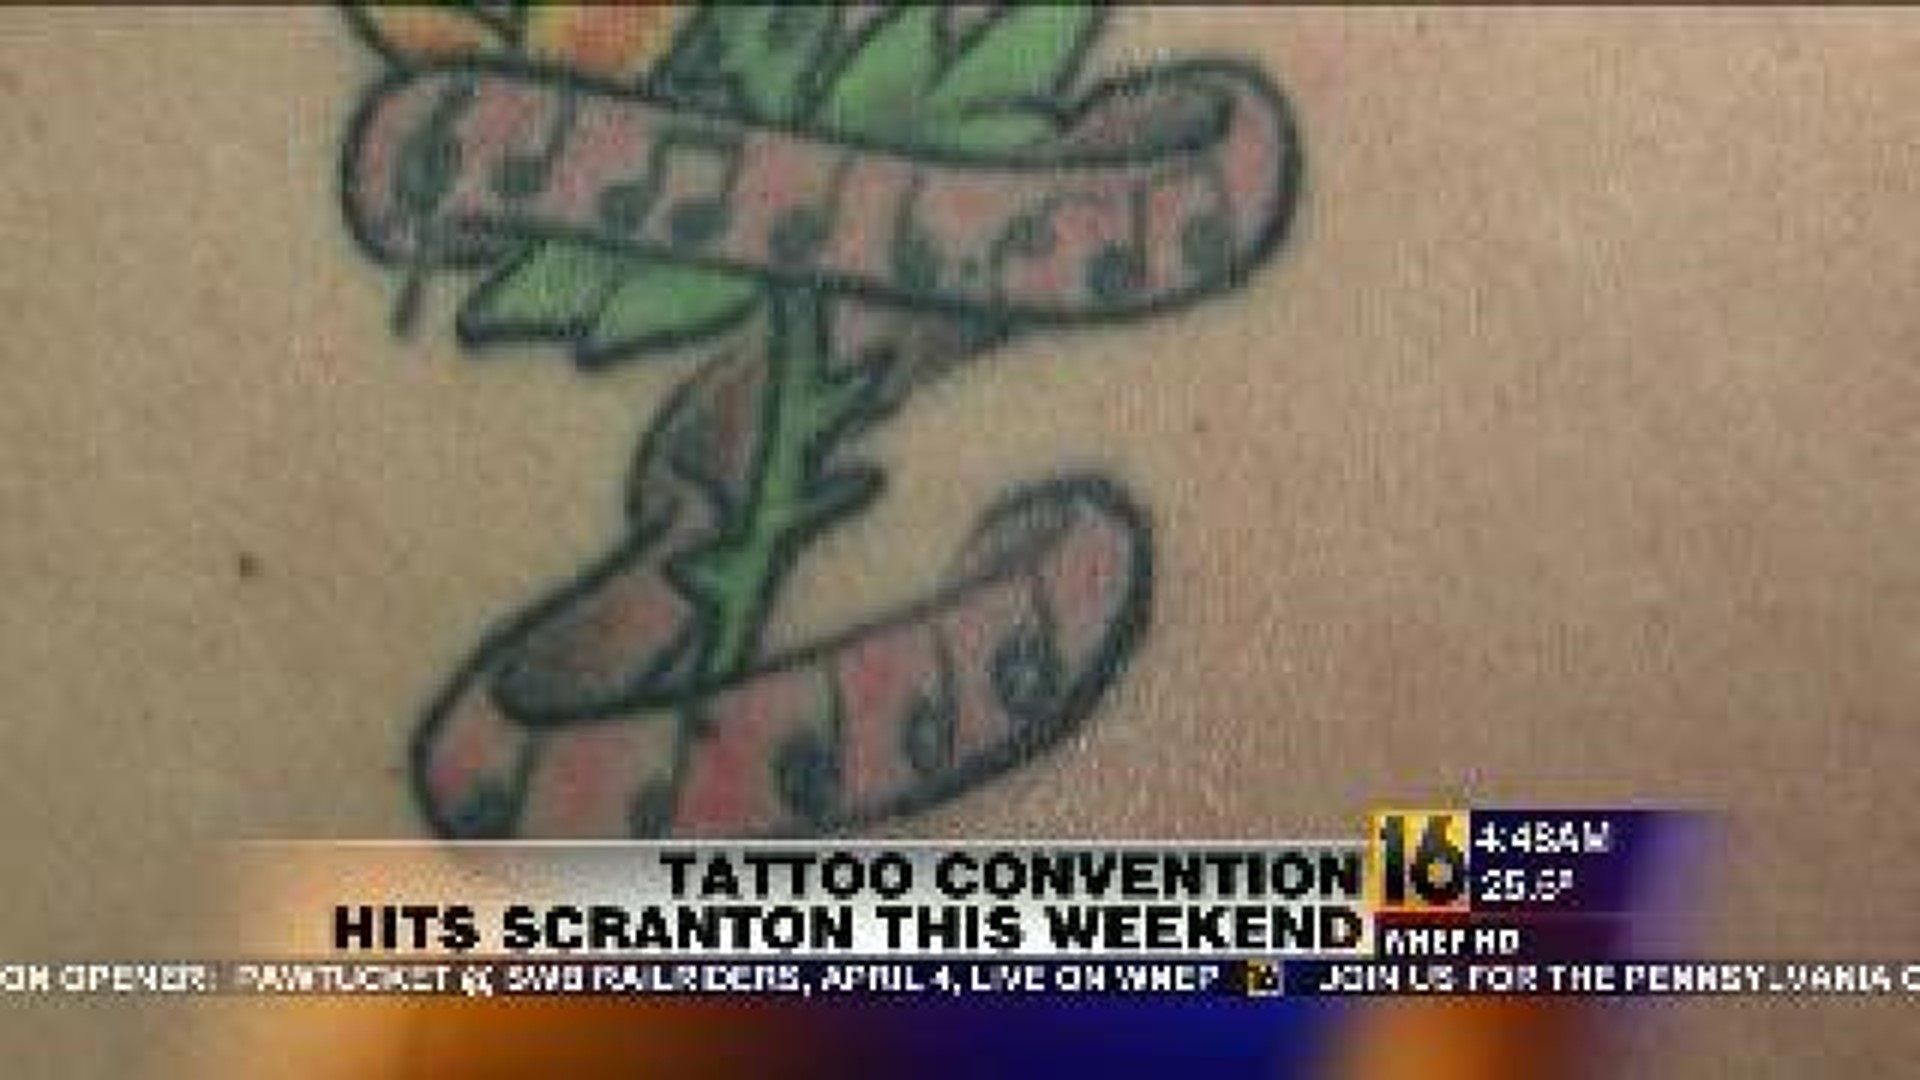 Tattoo Convention Hits Scranton This Weekend